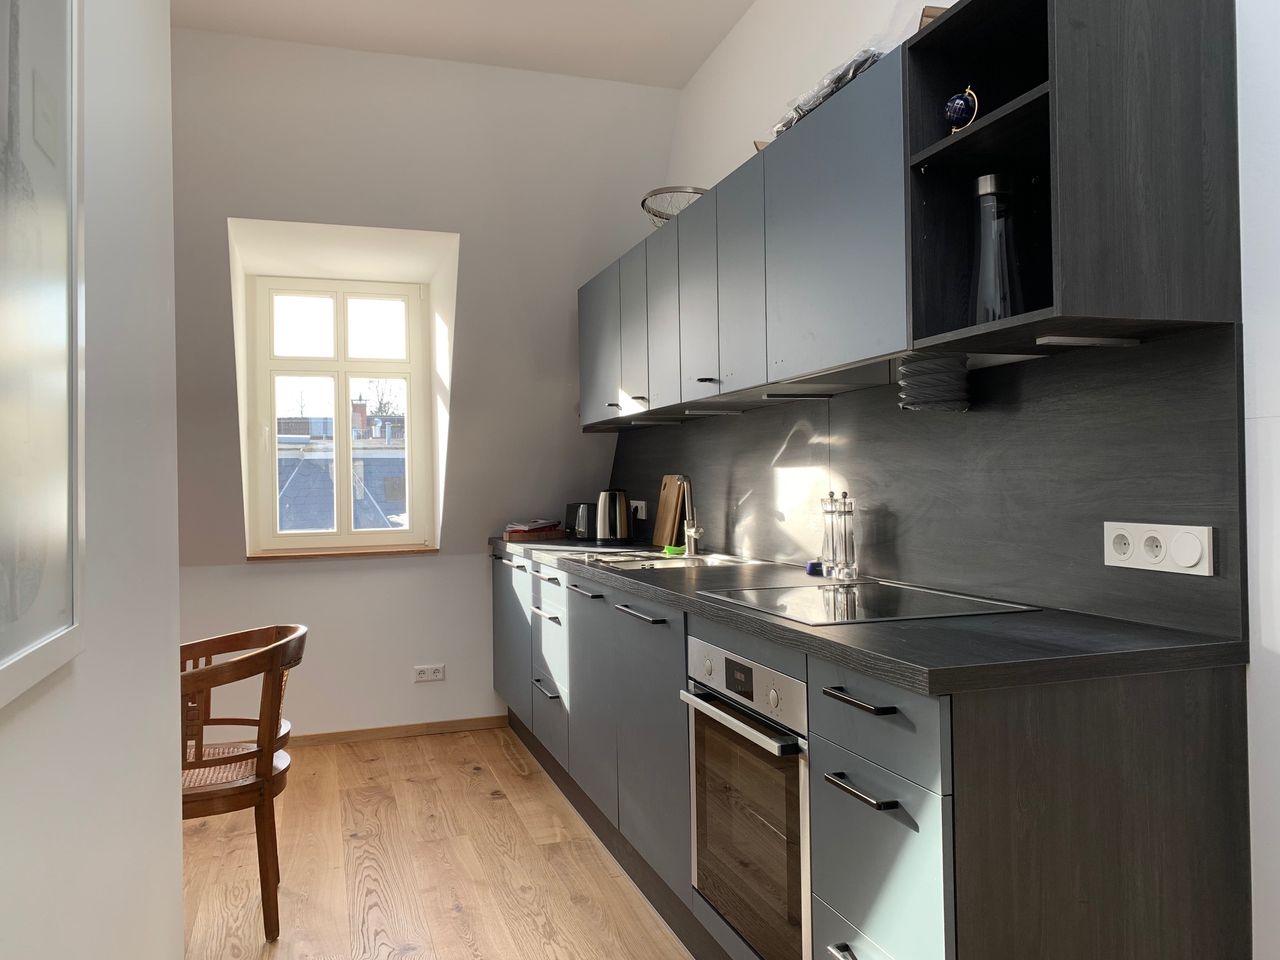 Historic brickstone apartment, quiet green area with a 10 min train connection to city